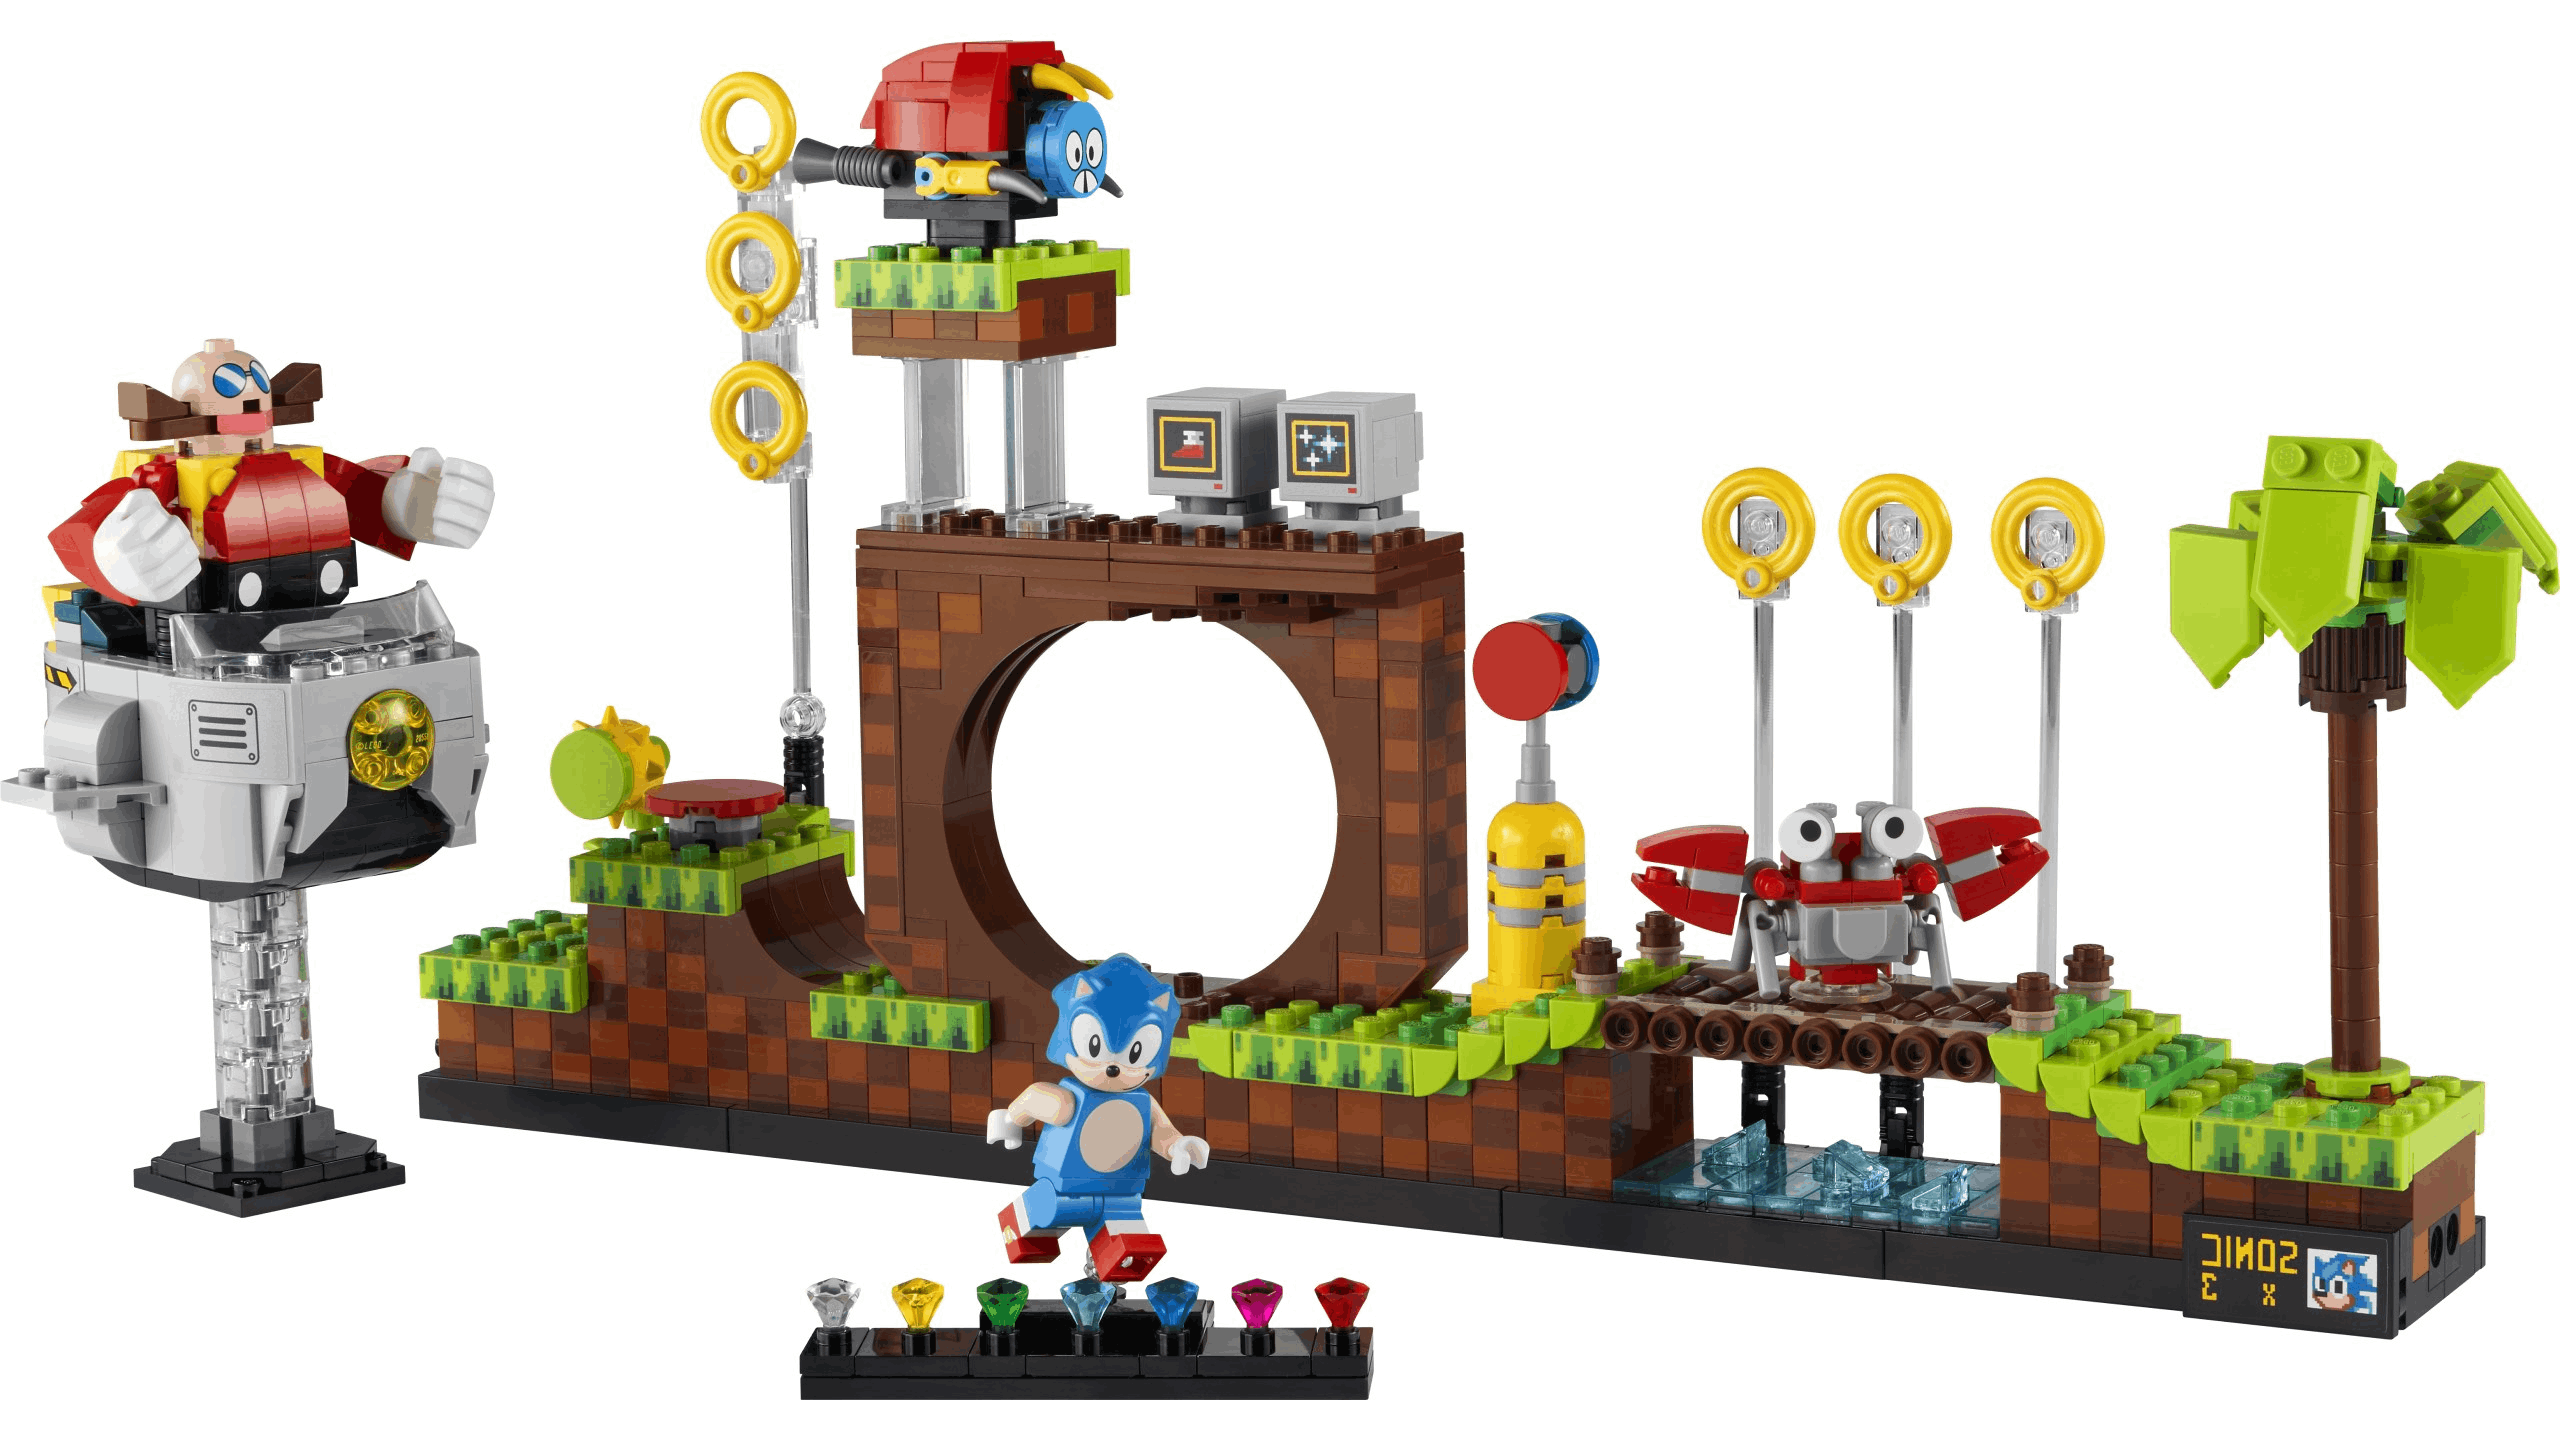 LEGO SONIC THE HEDGEHOD GREEN HILL ZONE AVAILABLE: THE IDEA SET HAS ARRIVED